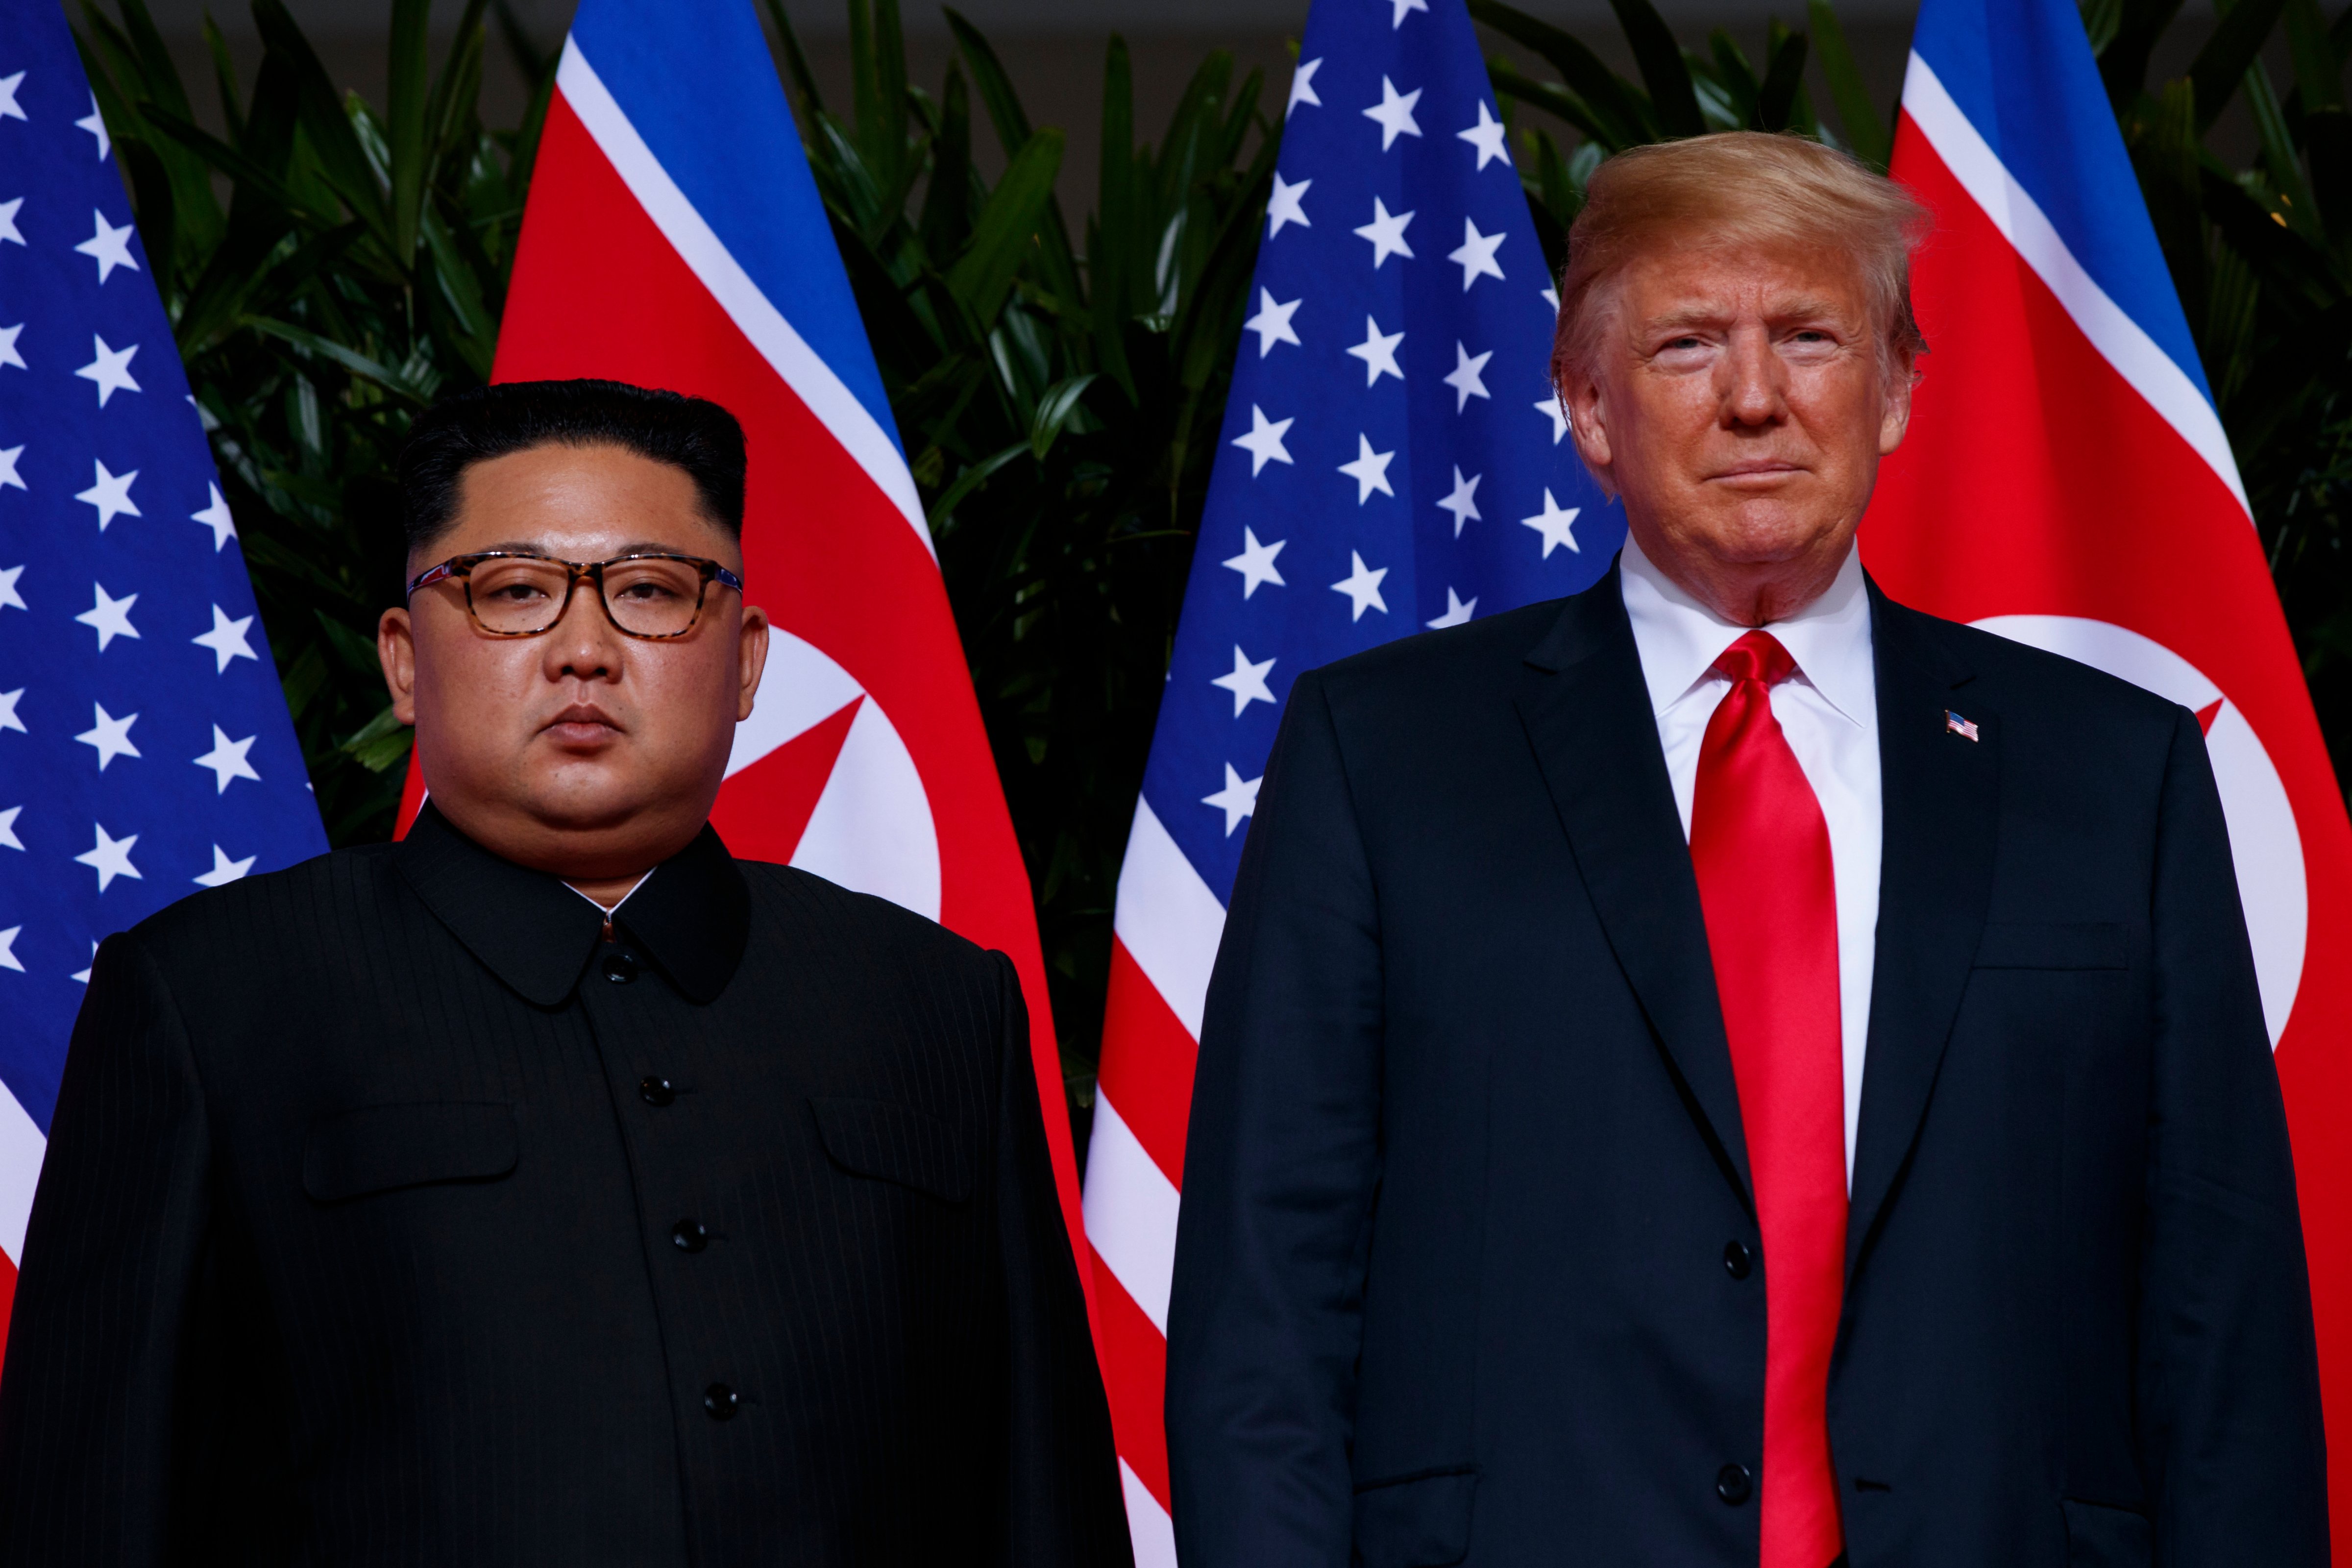 In this June 12, 2018, photo, U.S. President Donald Trump stands with North Korean leader Kim Jong Un during a meeting on Sentosa Island, in Singapore. For some observers, the nightmare result of the second summit between Trump and Kim is an ill-considered deal that allows North Korea to get everything it wants while giving up very little, even as the mercurial leaders trumpet a blockbuster nuclear success. (Evan Vucci&mdash;AP)